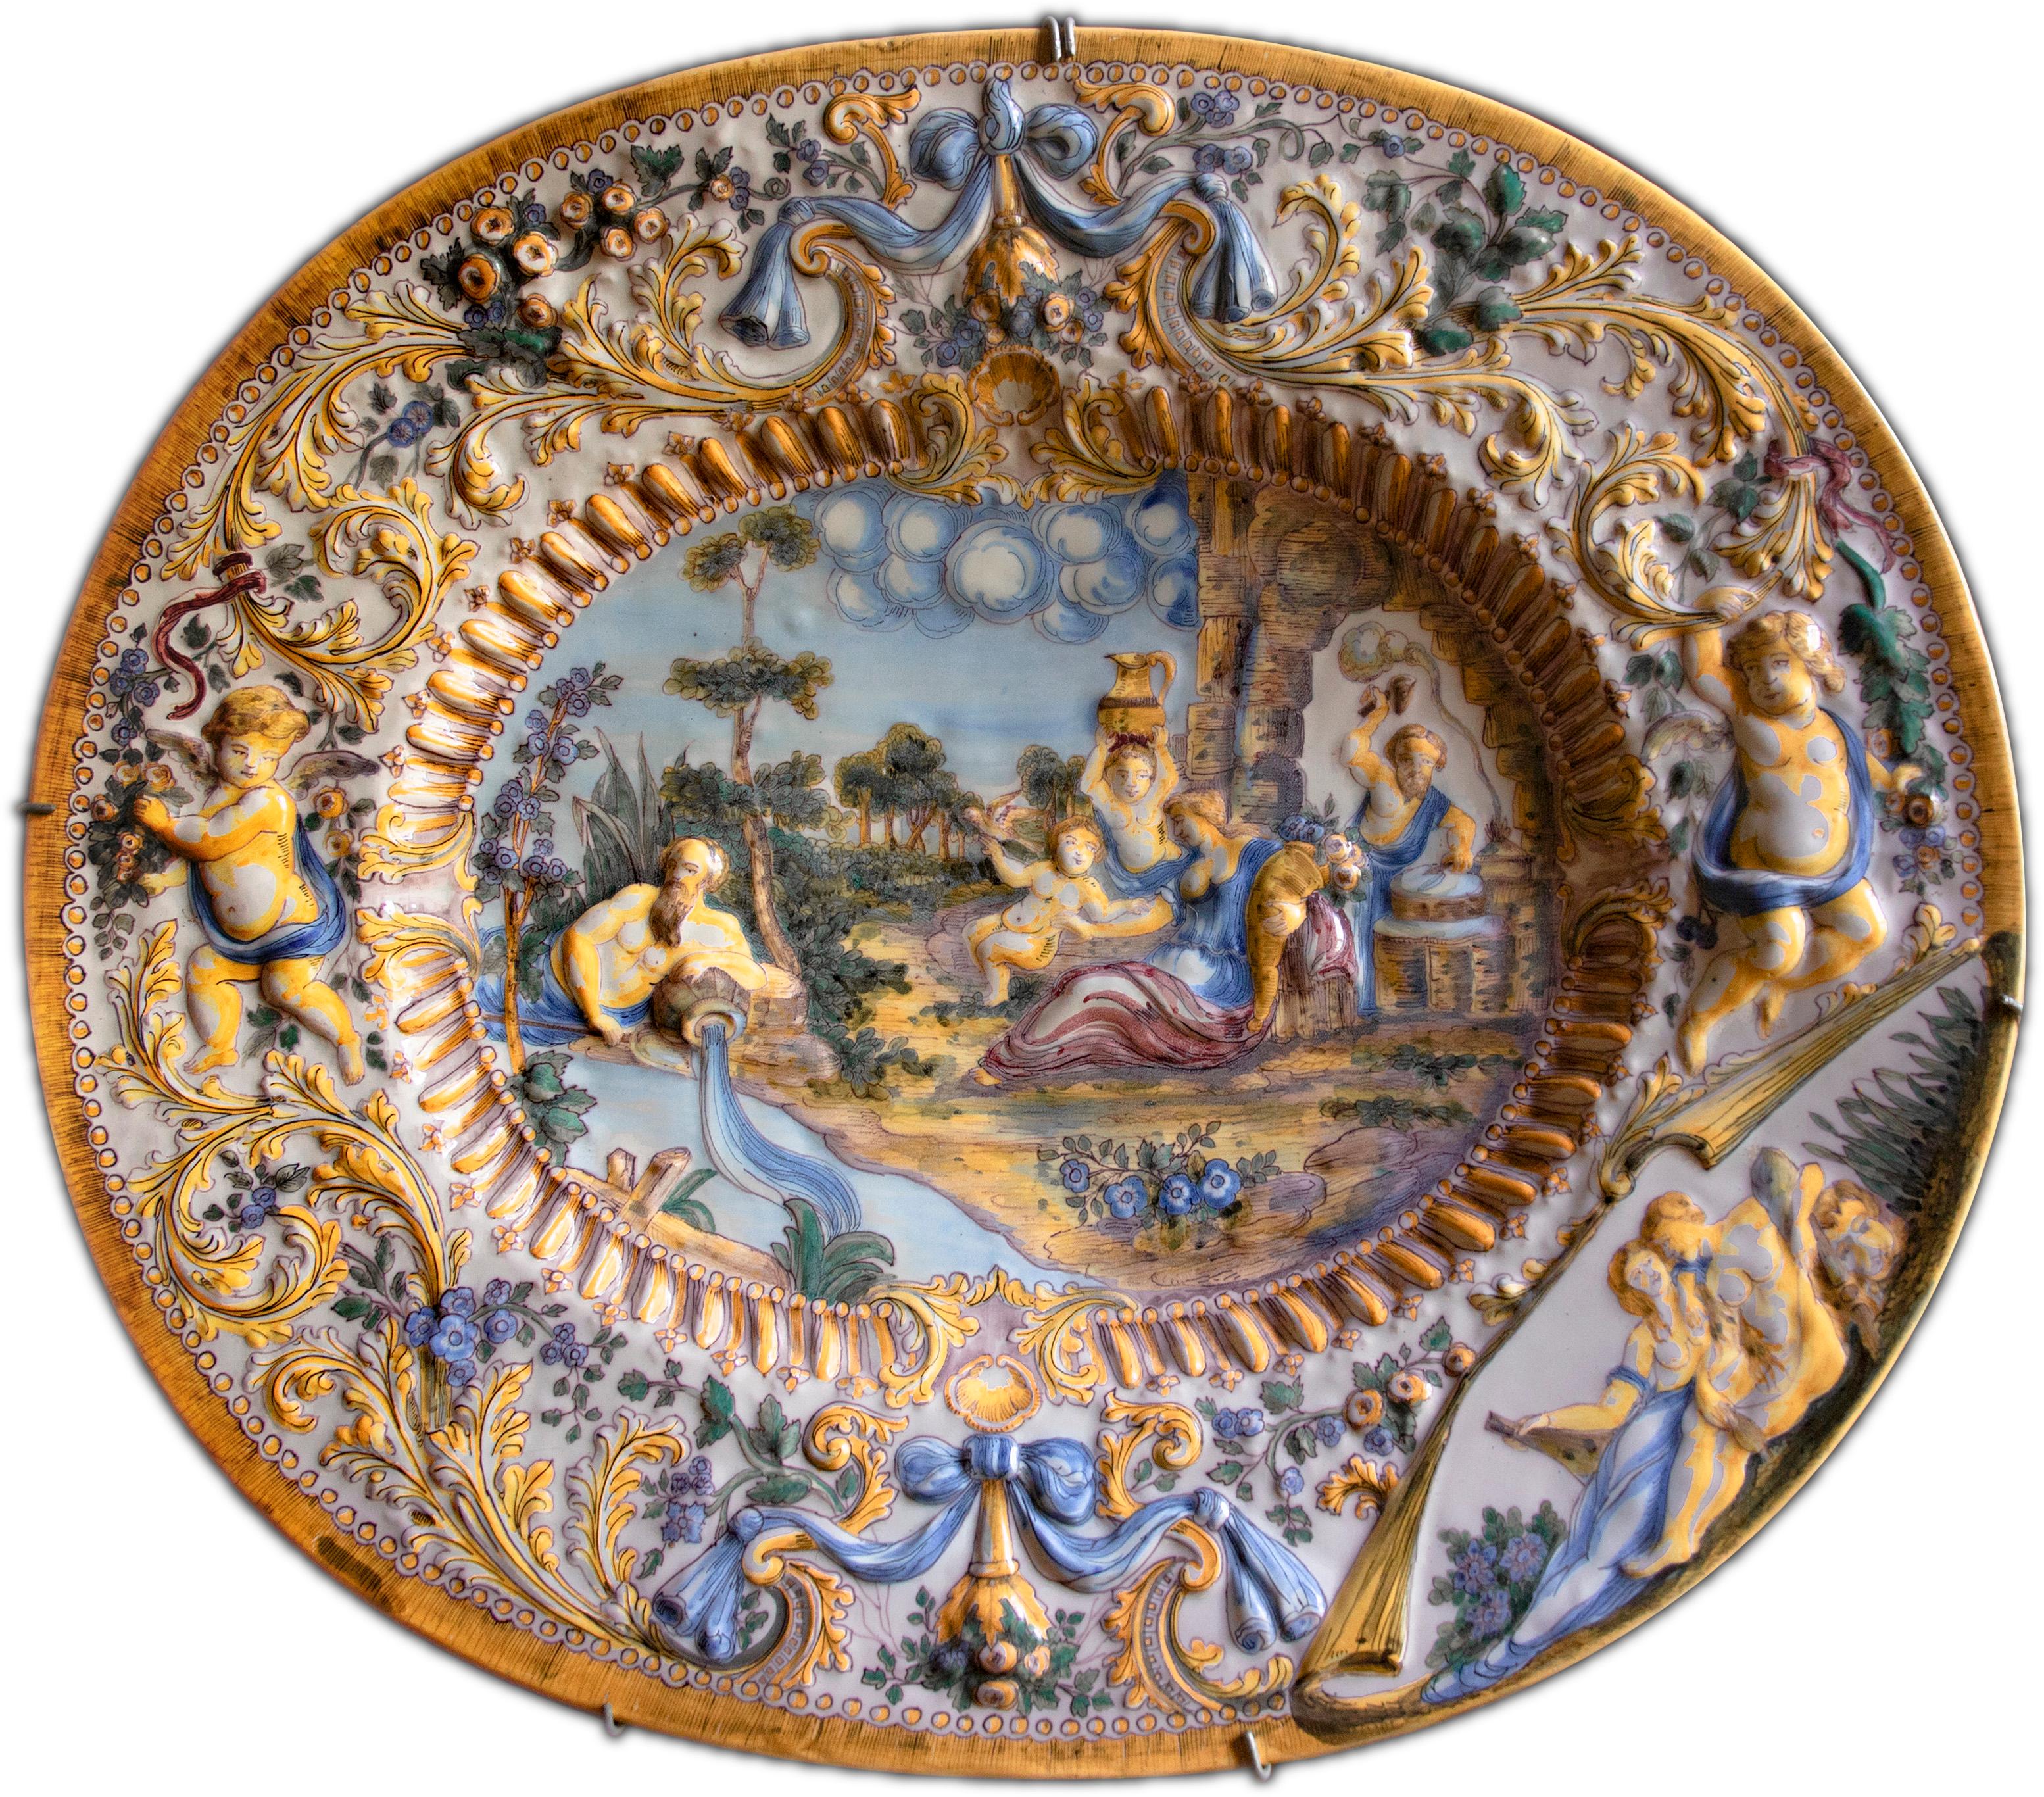 Oval Italian ceramic dish adorned with baroque figures and decoration in relief - Art by Unknown